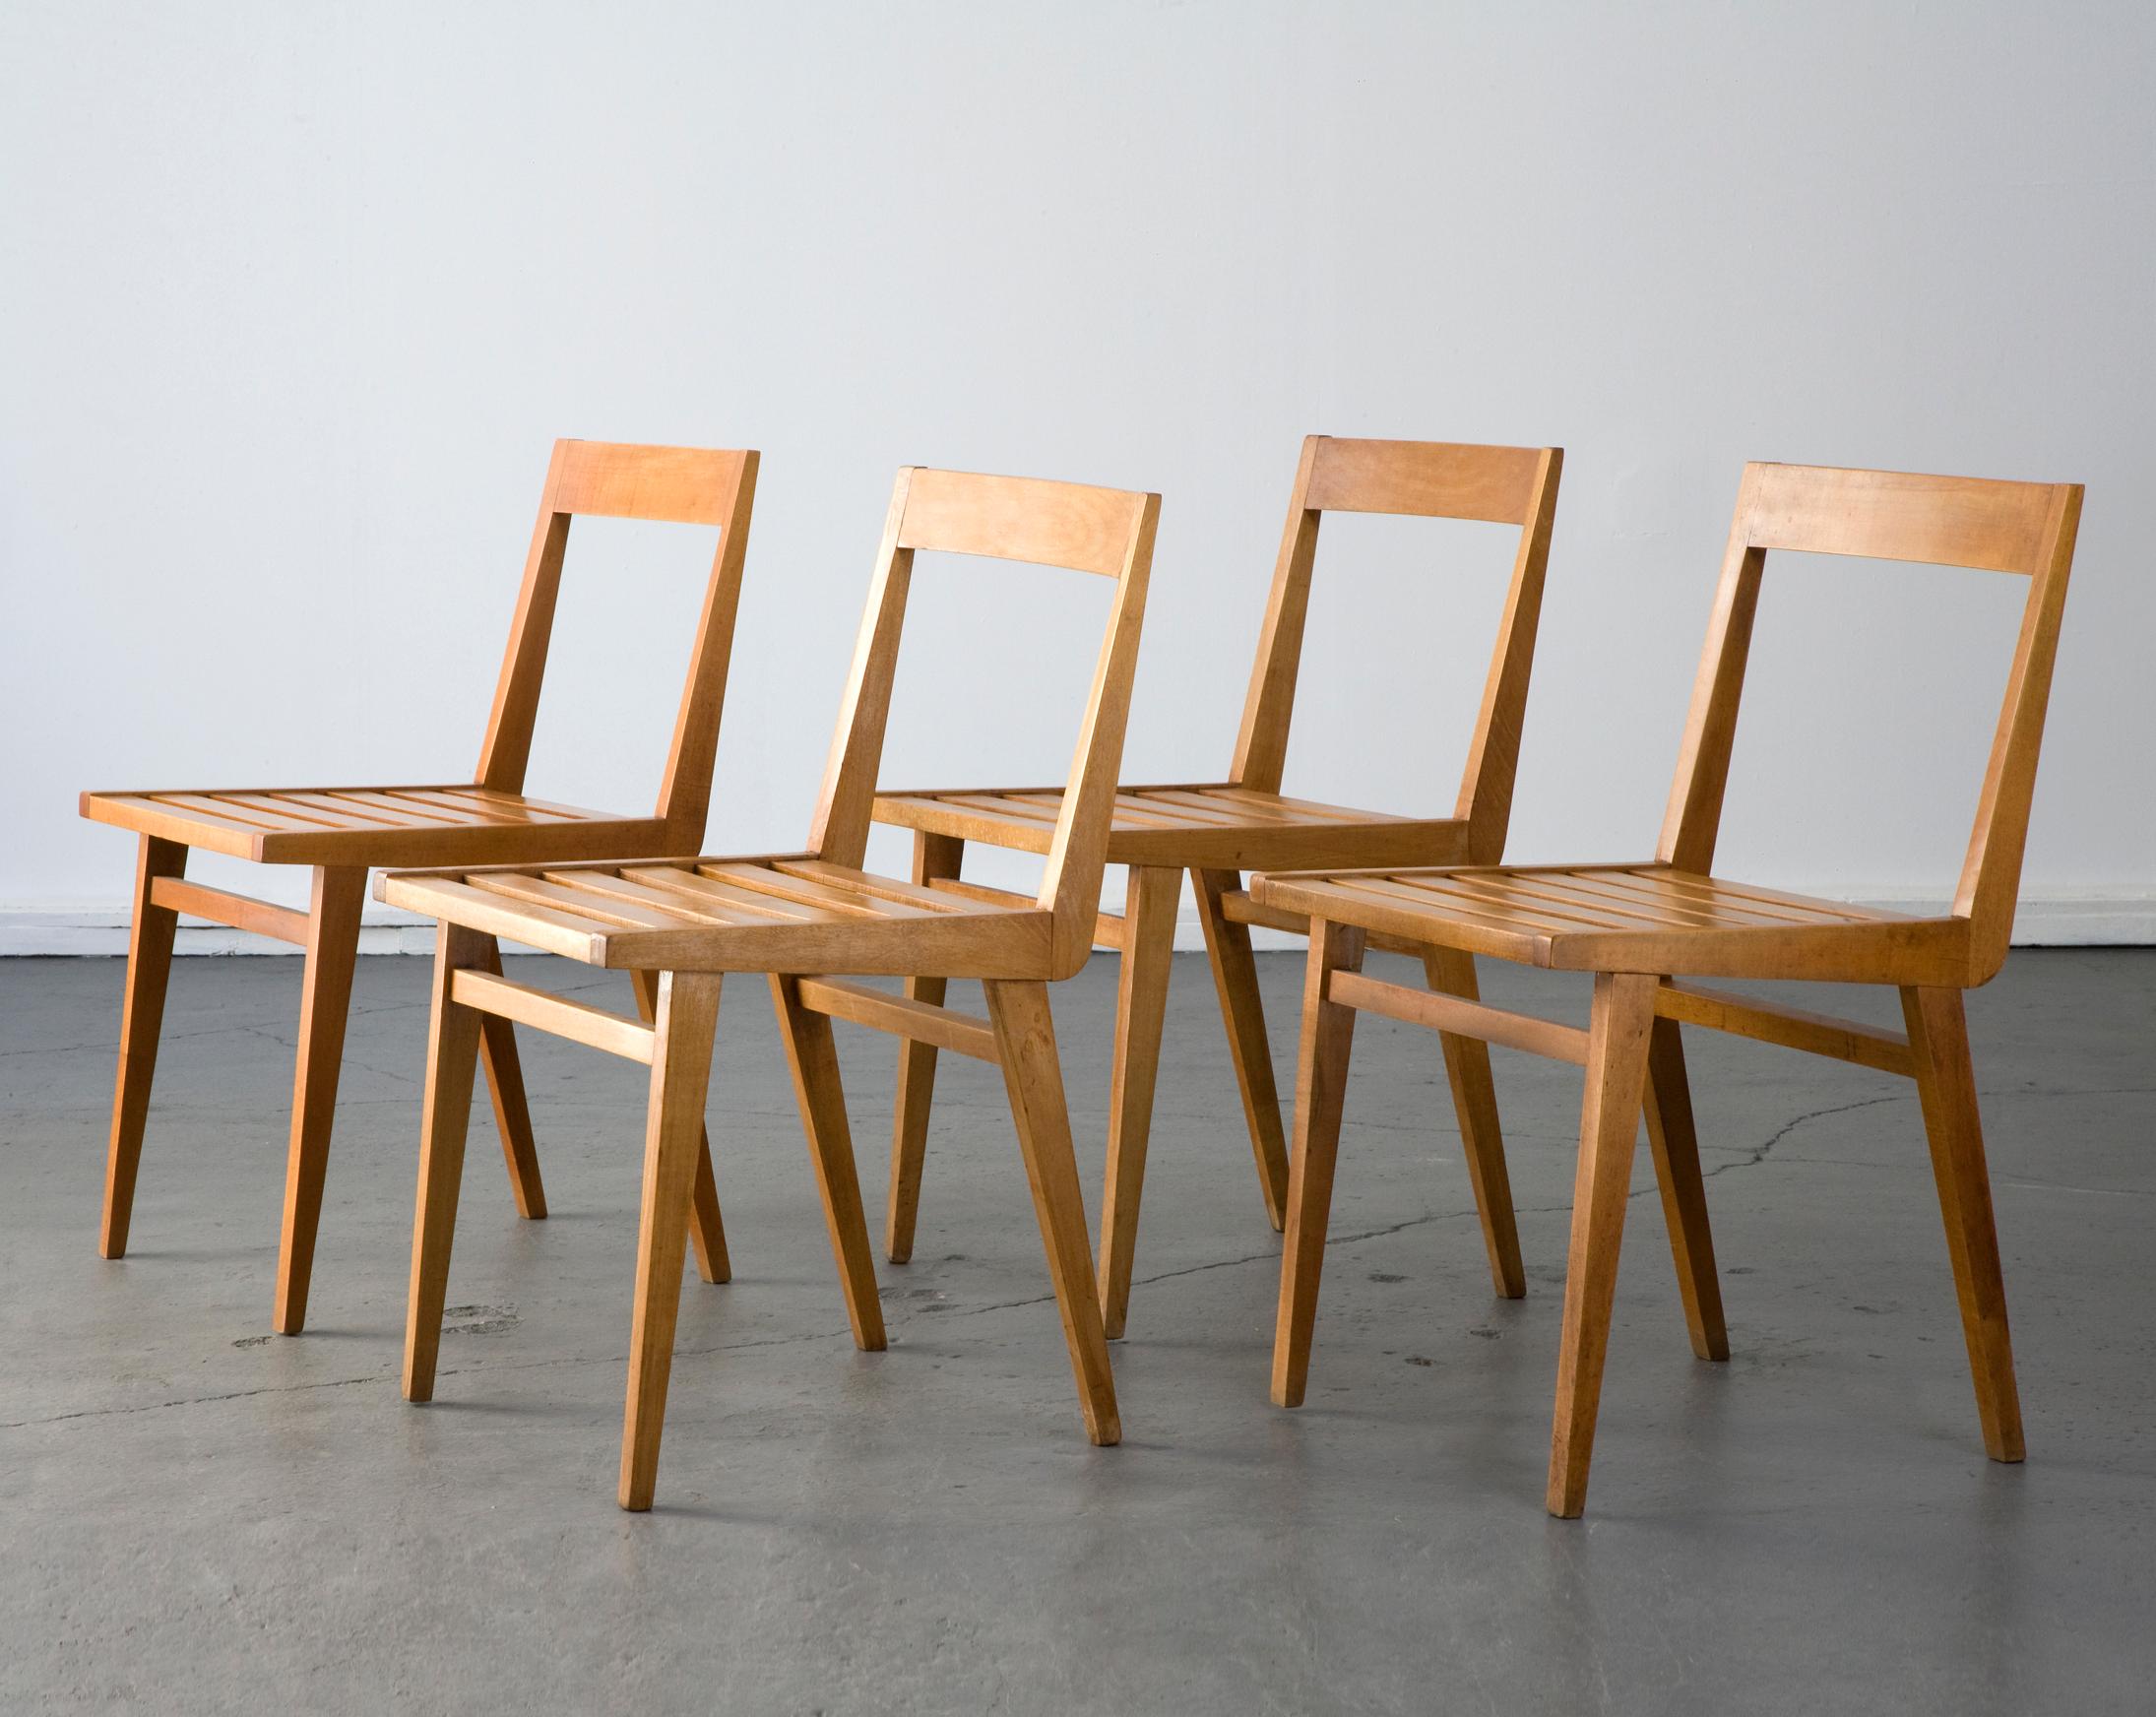 Set of four (4) chairs with slatted seat in pau marfim (ivory wood). Designed by Joaquim Tenreiro, Brazil, 1950s.